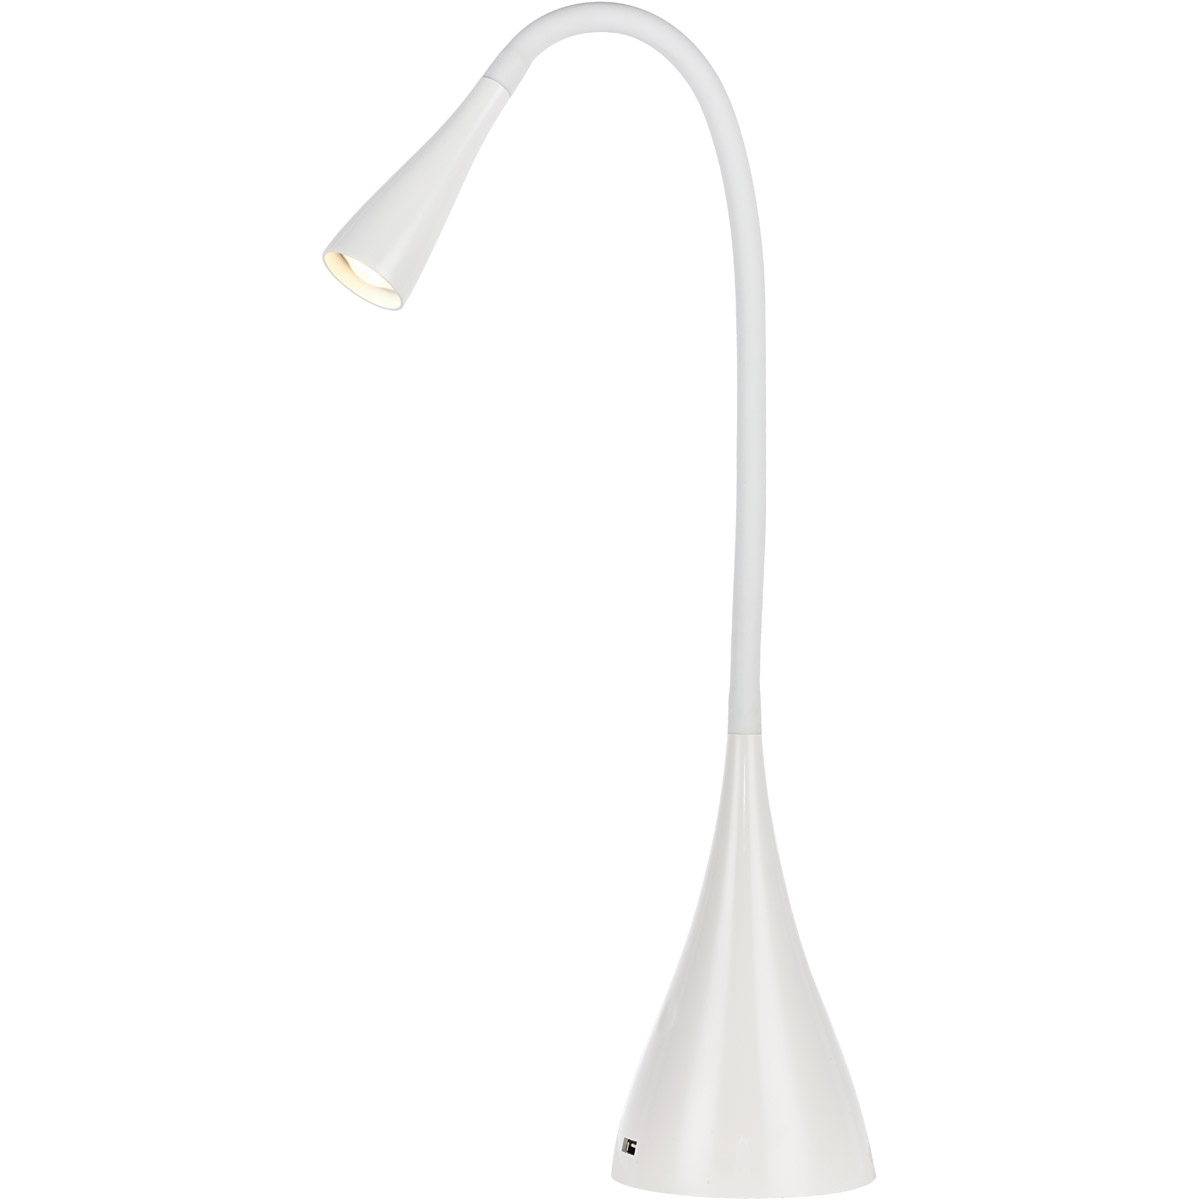 Ledds011 Sleek Led Desk Lamp With Smooth Touch Dimmer & Usb, Glossywhite